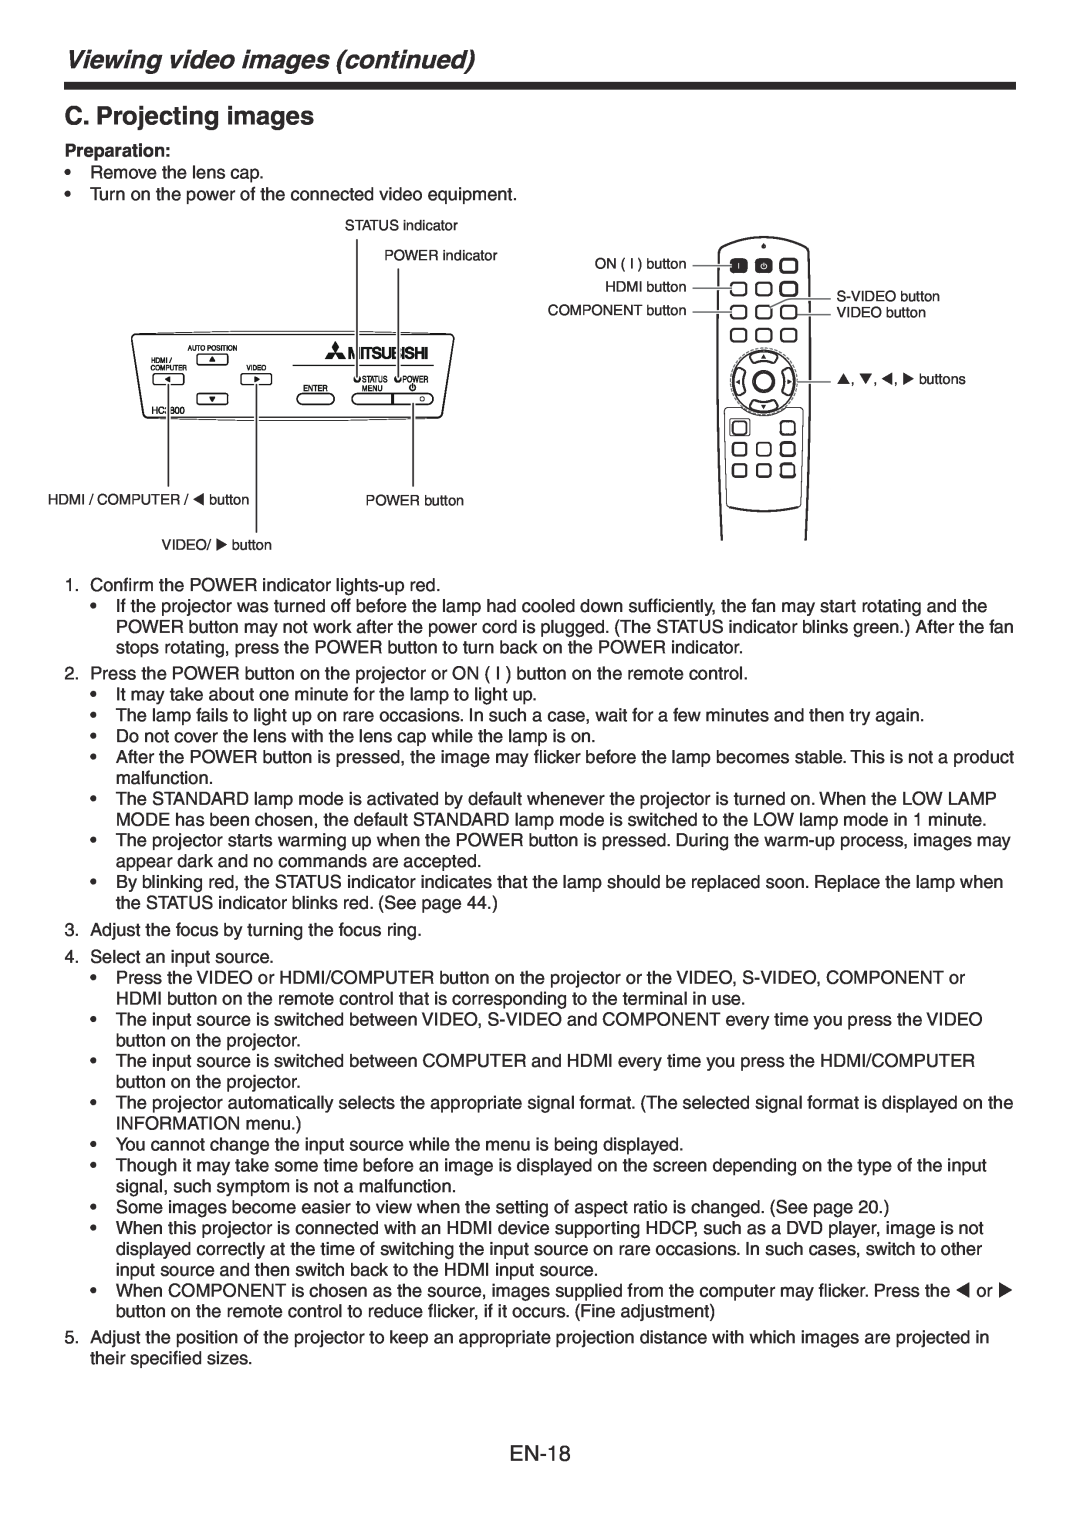 Mitsubishi Electronics HC3800 user manual C. Projecting images, Viewing video images continued, EN-18, Preparation 